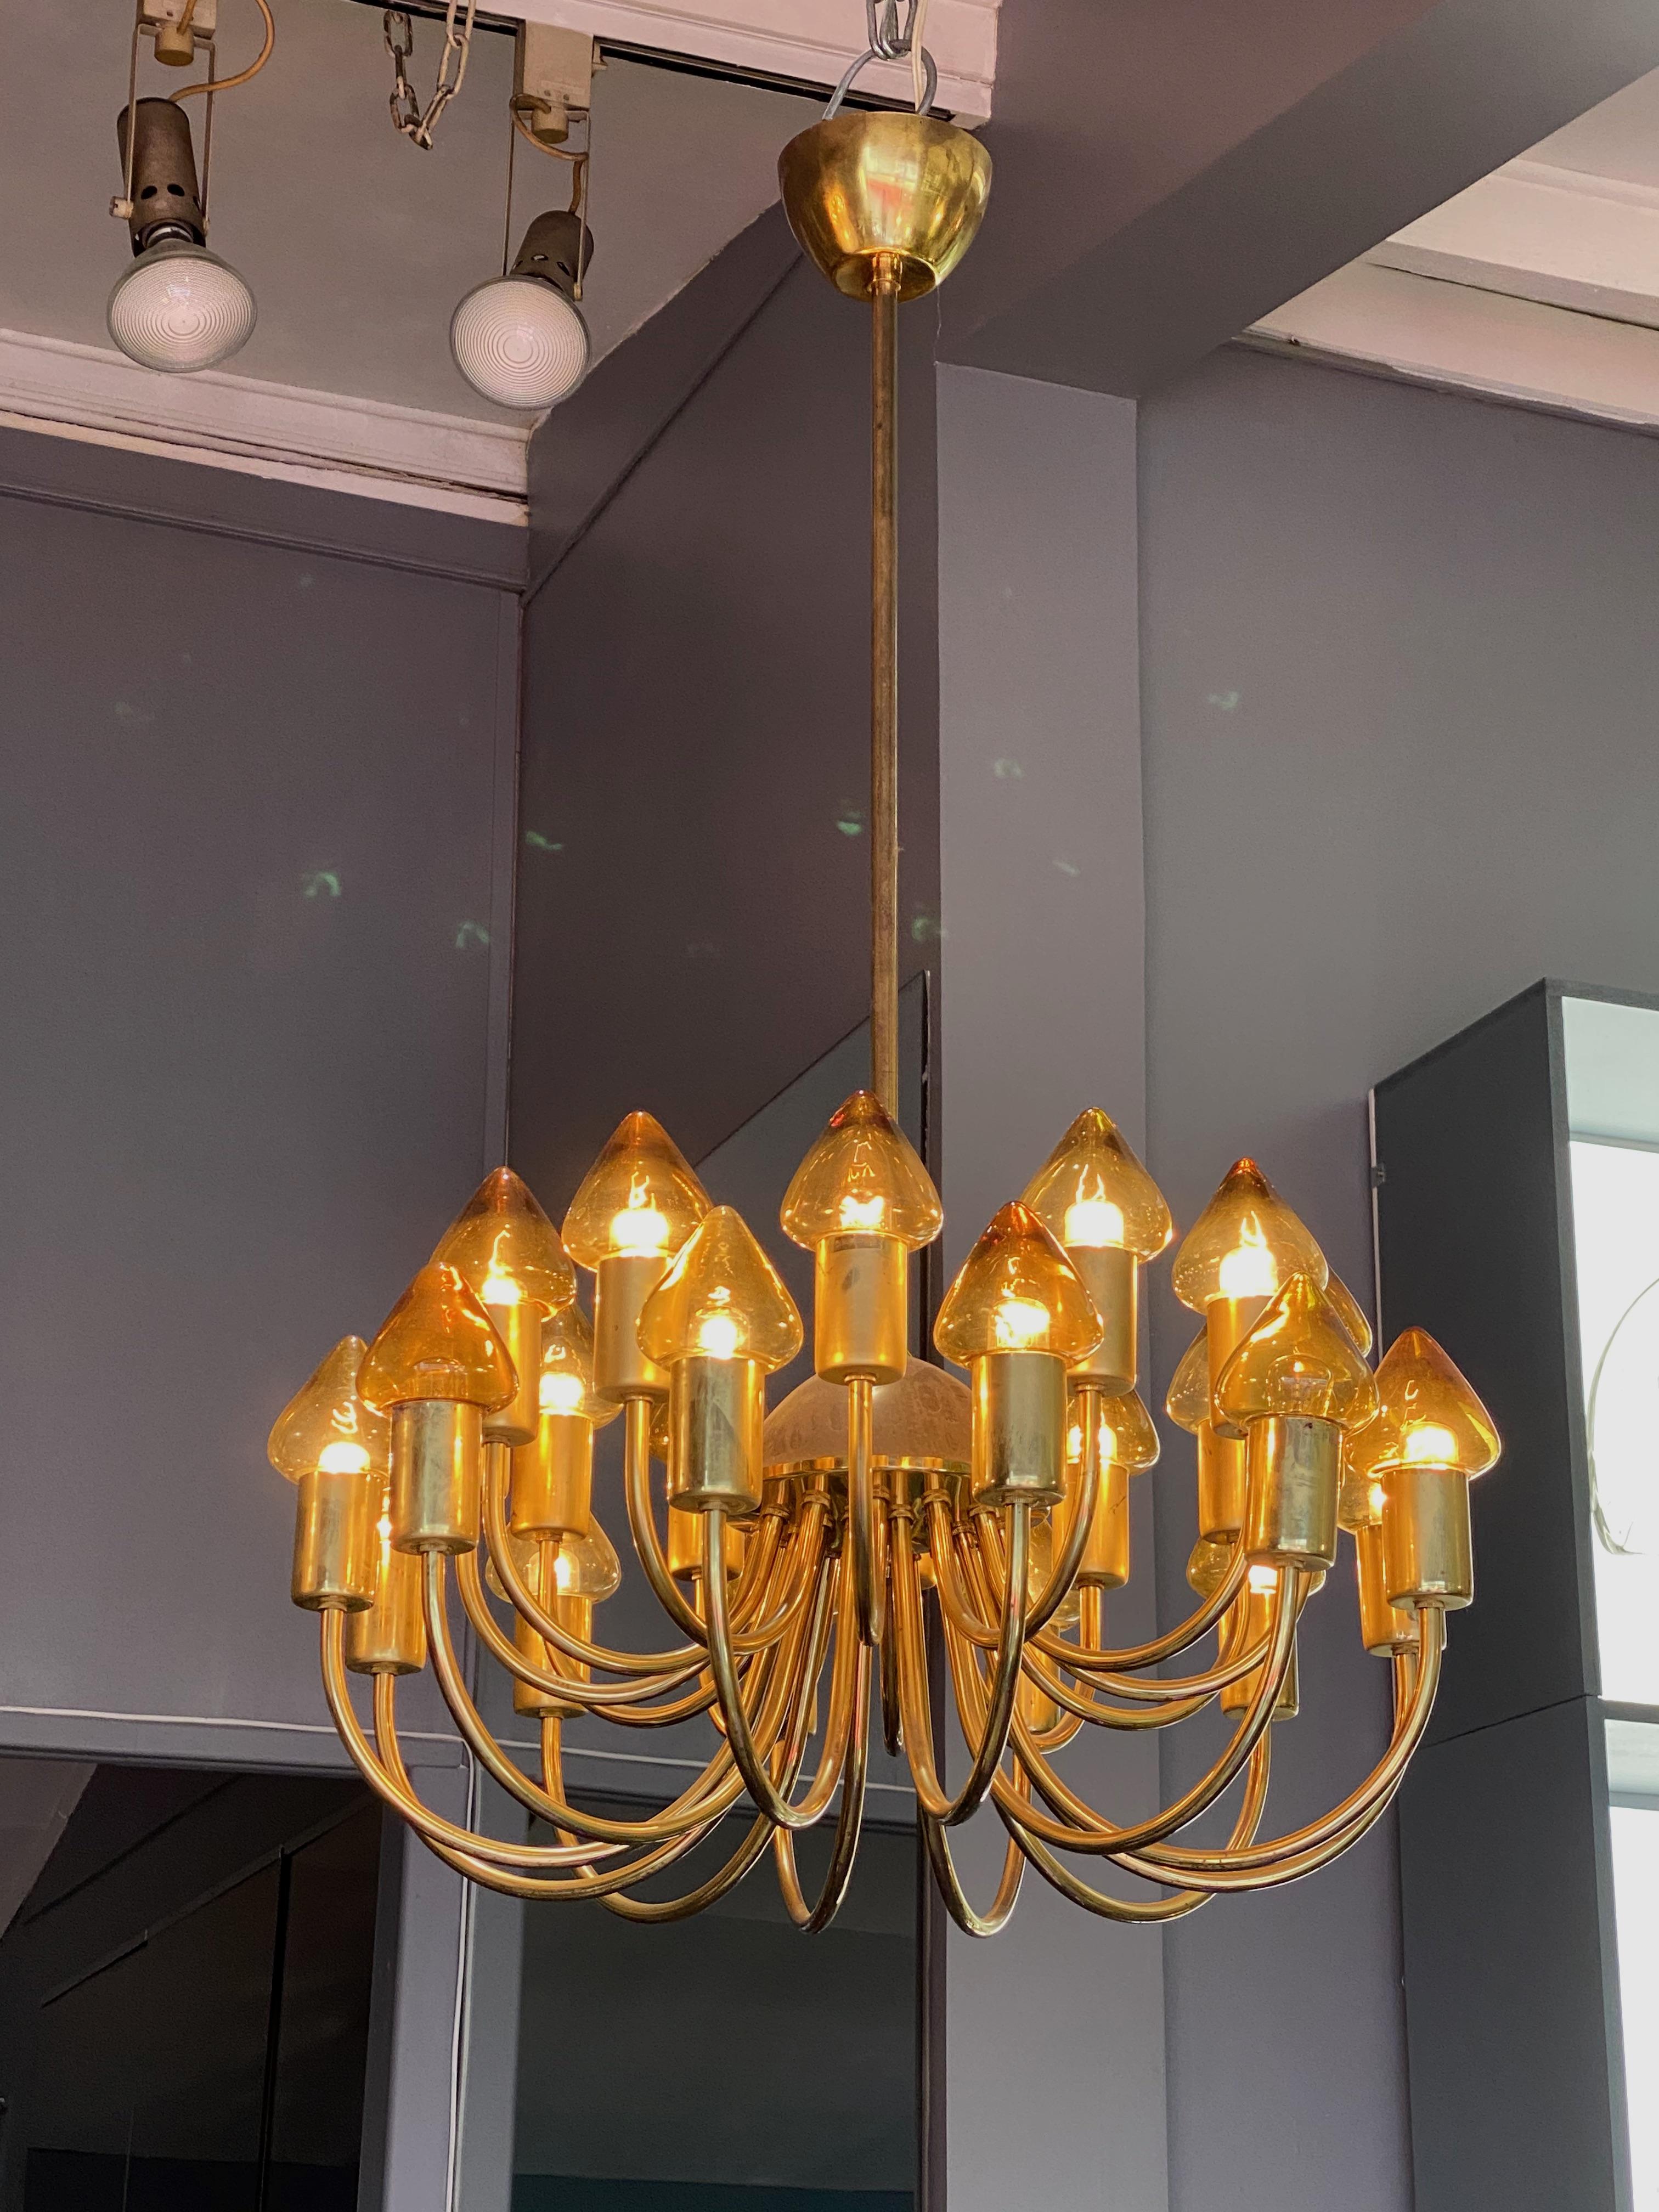 Arne Jacobsen : Pair of Scale Brass Chandelier 
Unusual 60 cm in diameter chandelier with 24 fyellow glass shades by Arne Jacobsen - Denmark circa 1950's.
one yellow shade missing